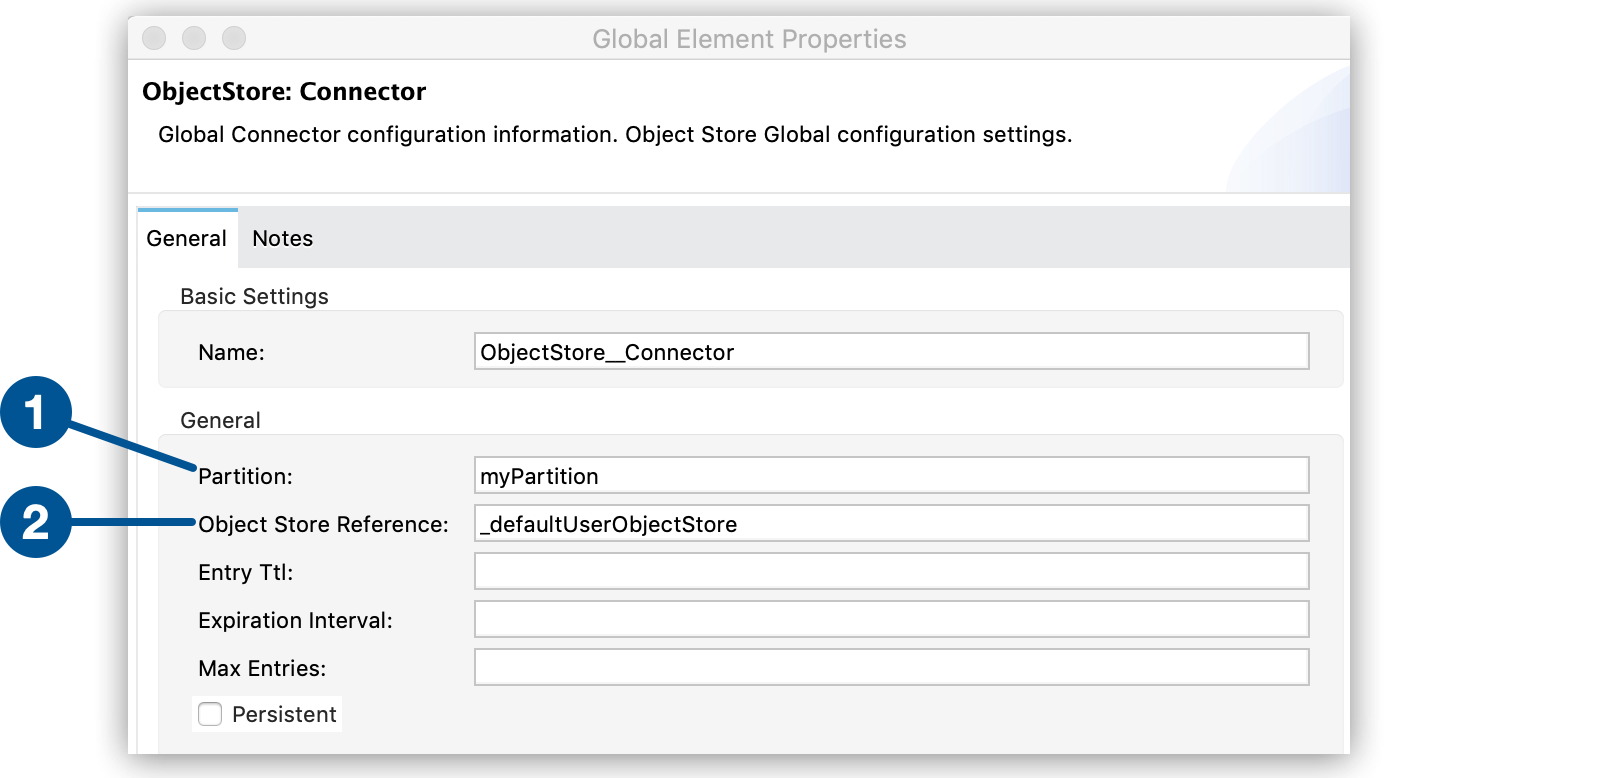 Partition and Object Store Reference fields in the Global Element Properties window